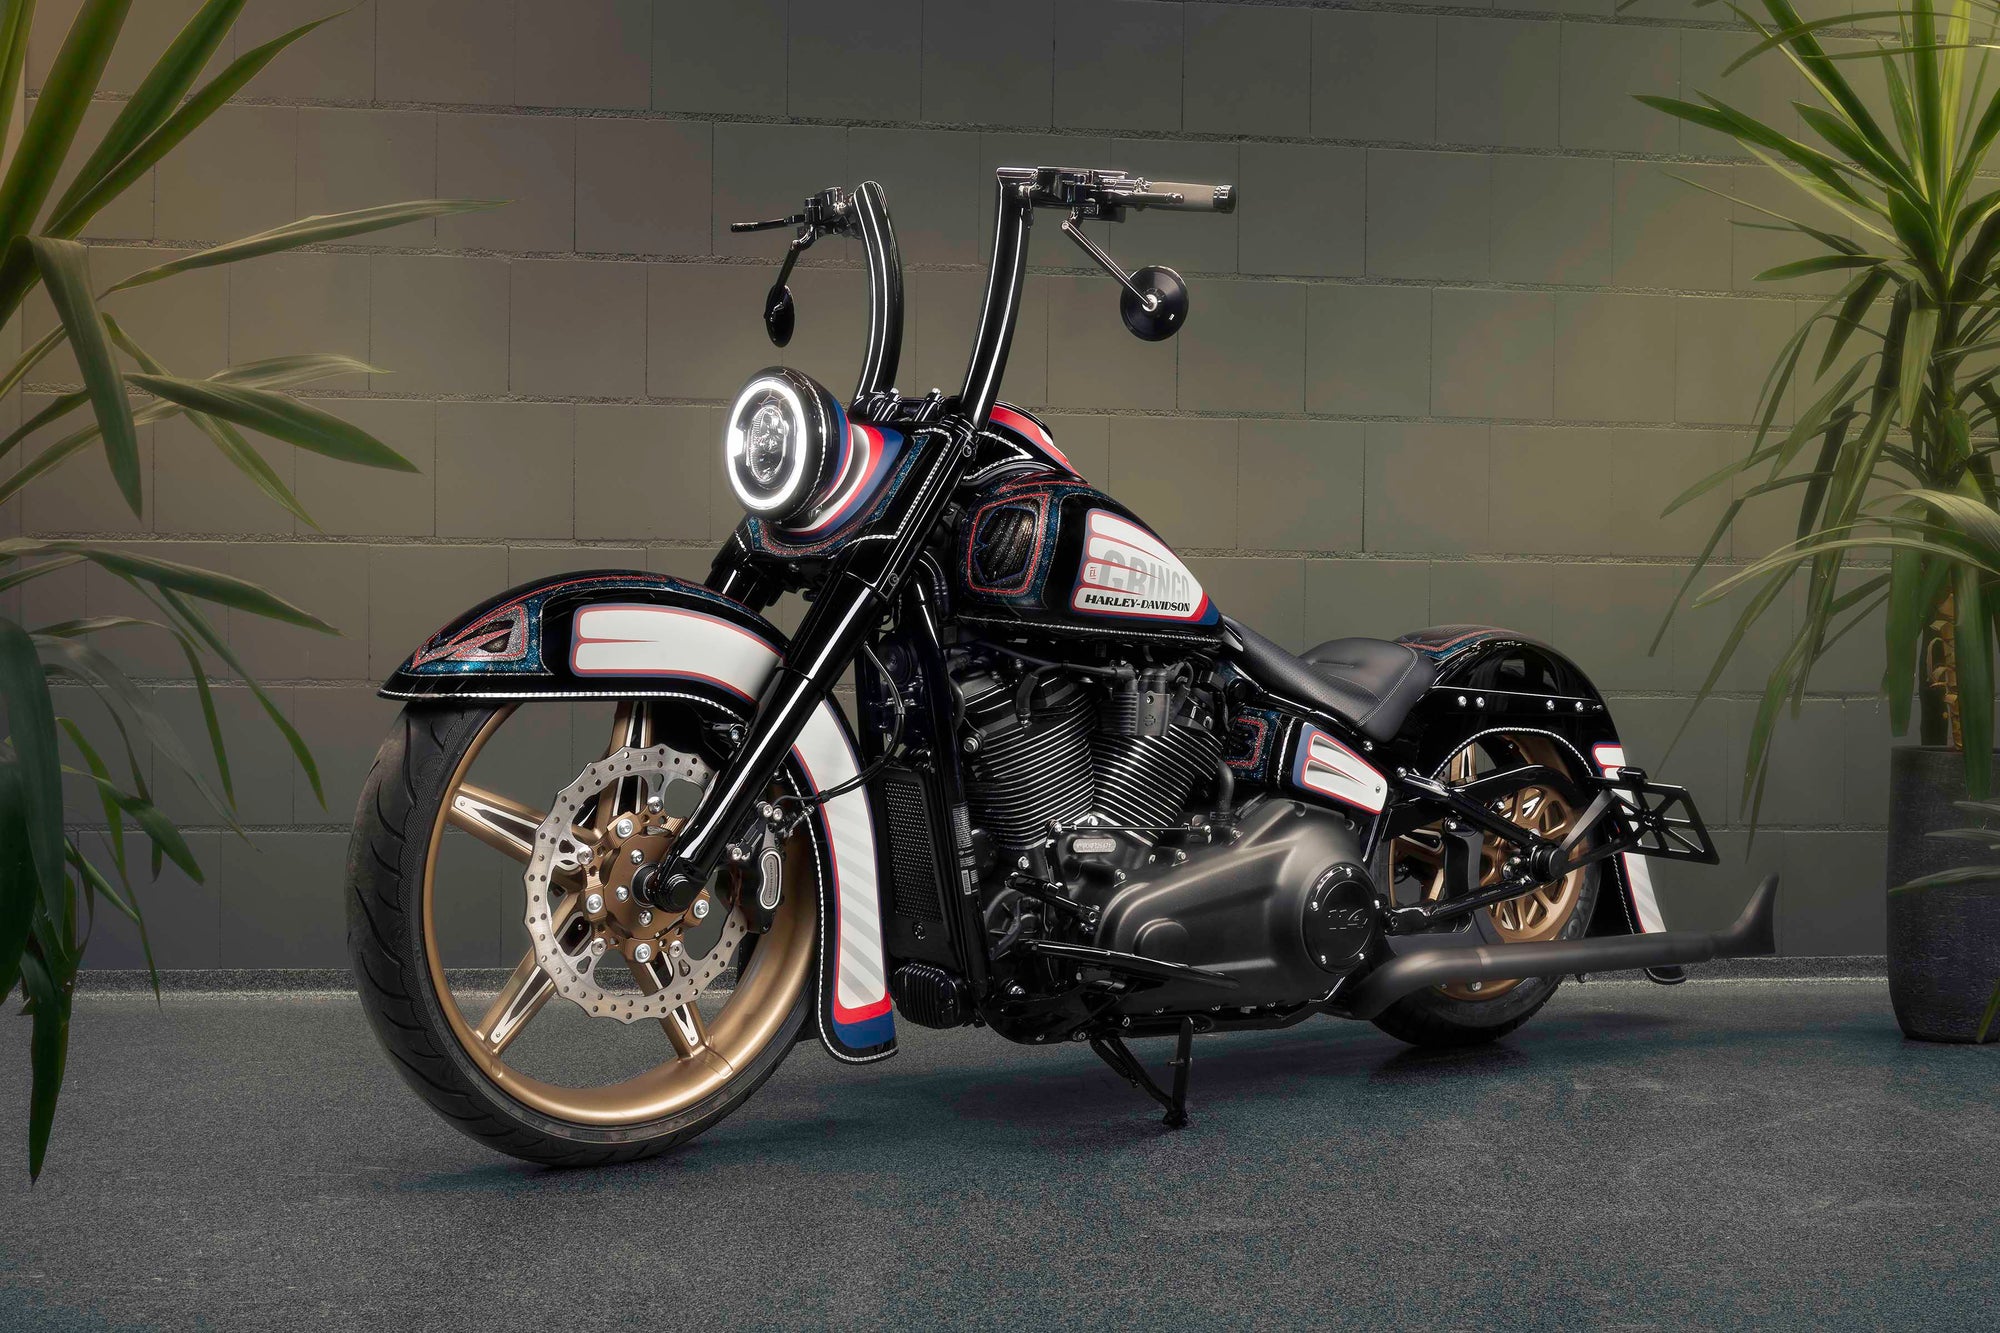 Modified Harley Davidson motorcycle with Killer Custom parts from the side grey brick wall in the background